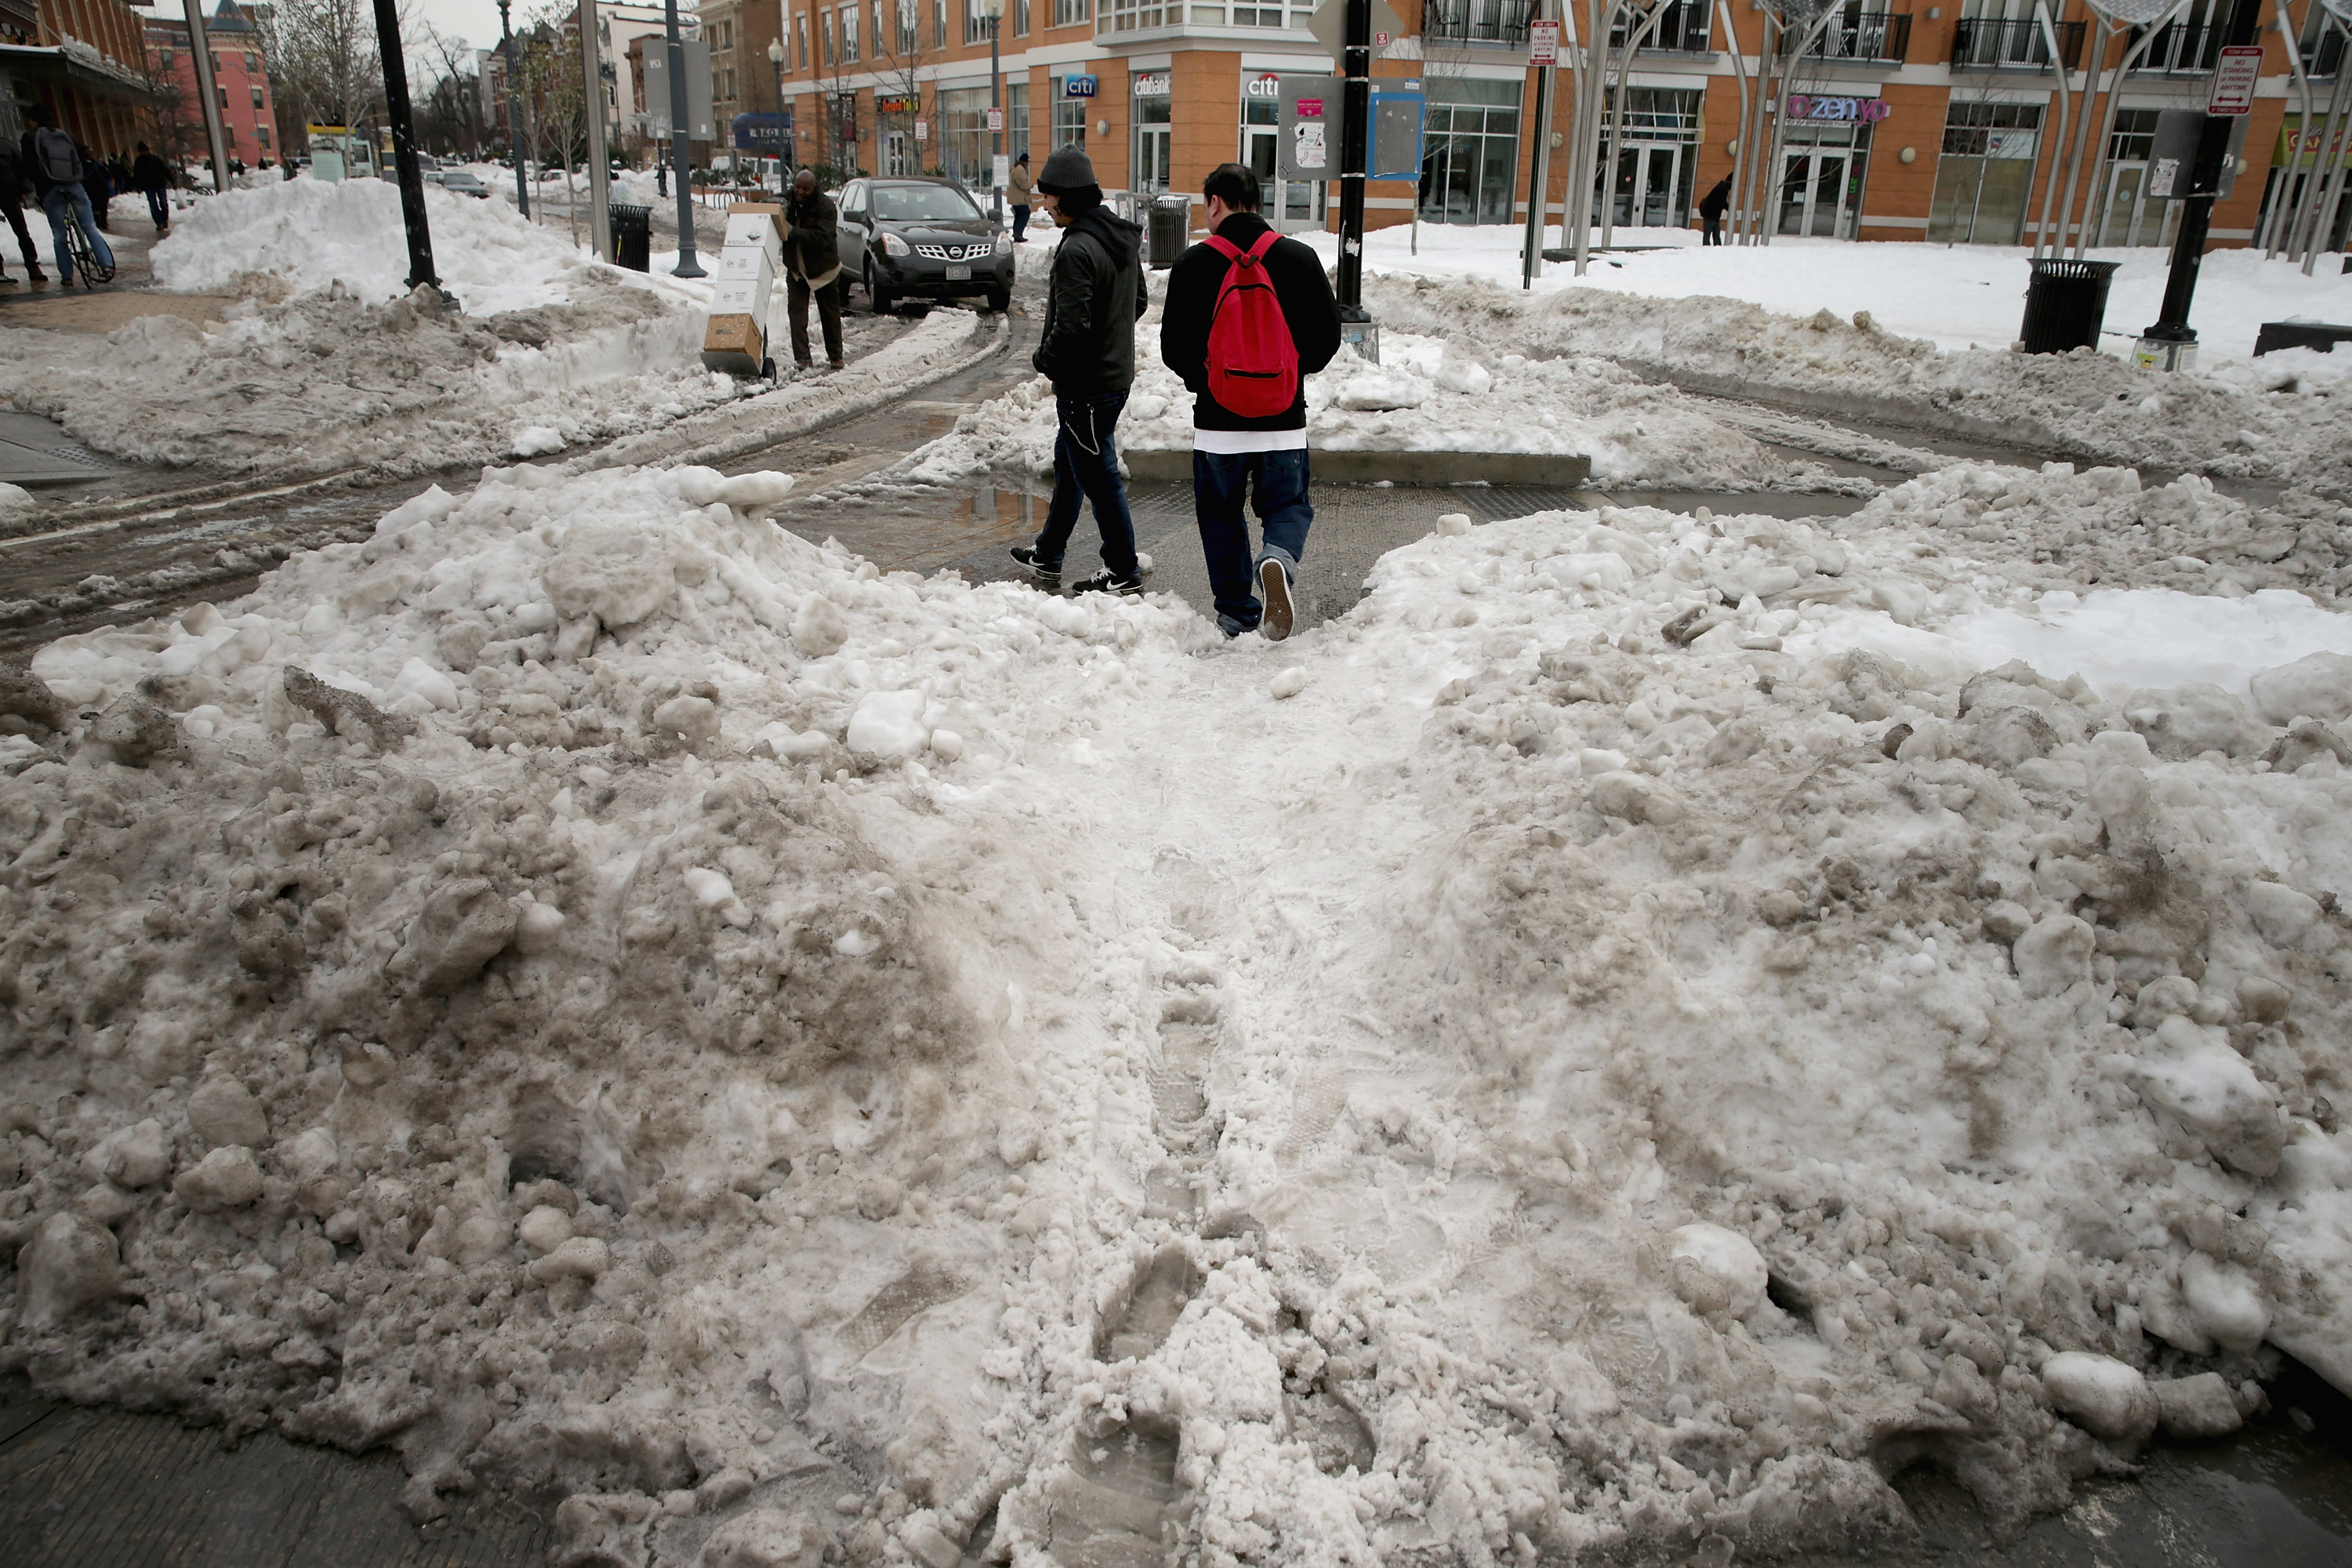 D.C. officials assess local response to massive blizzard